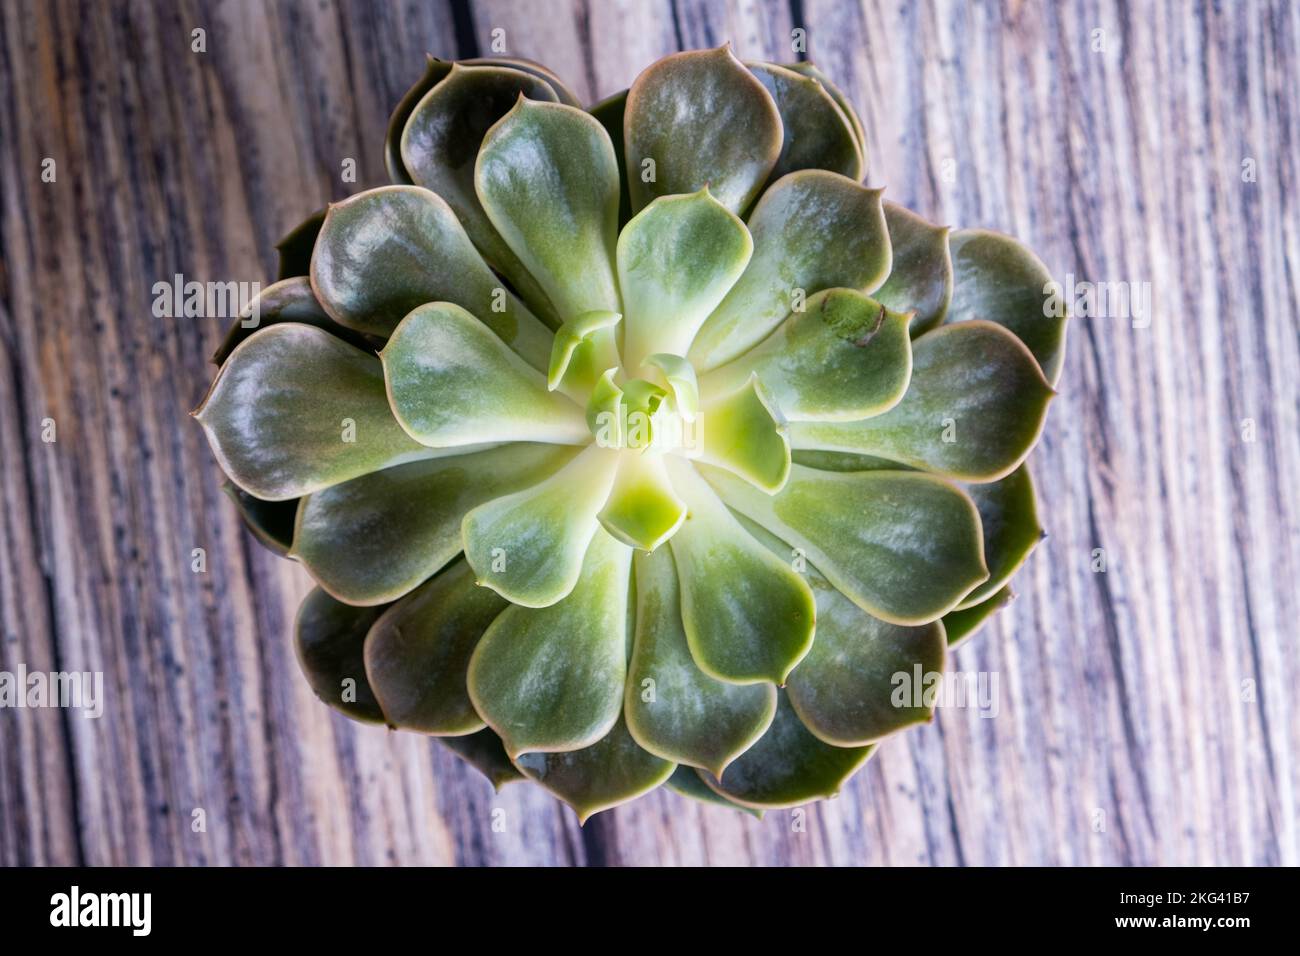 Cactus in a vase isolated on wood. Upper view Stock Photo